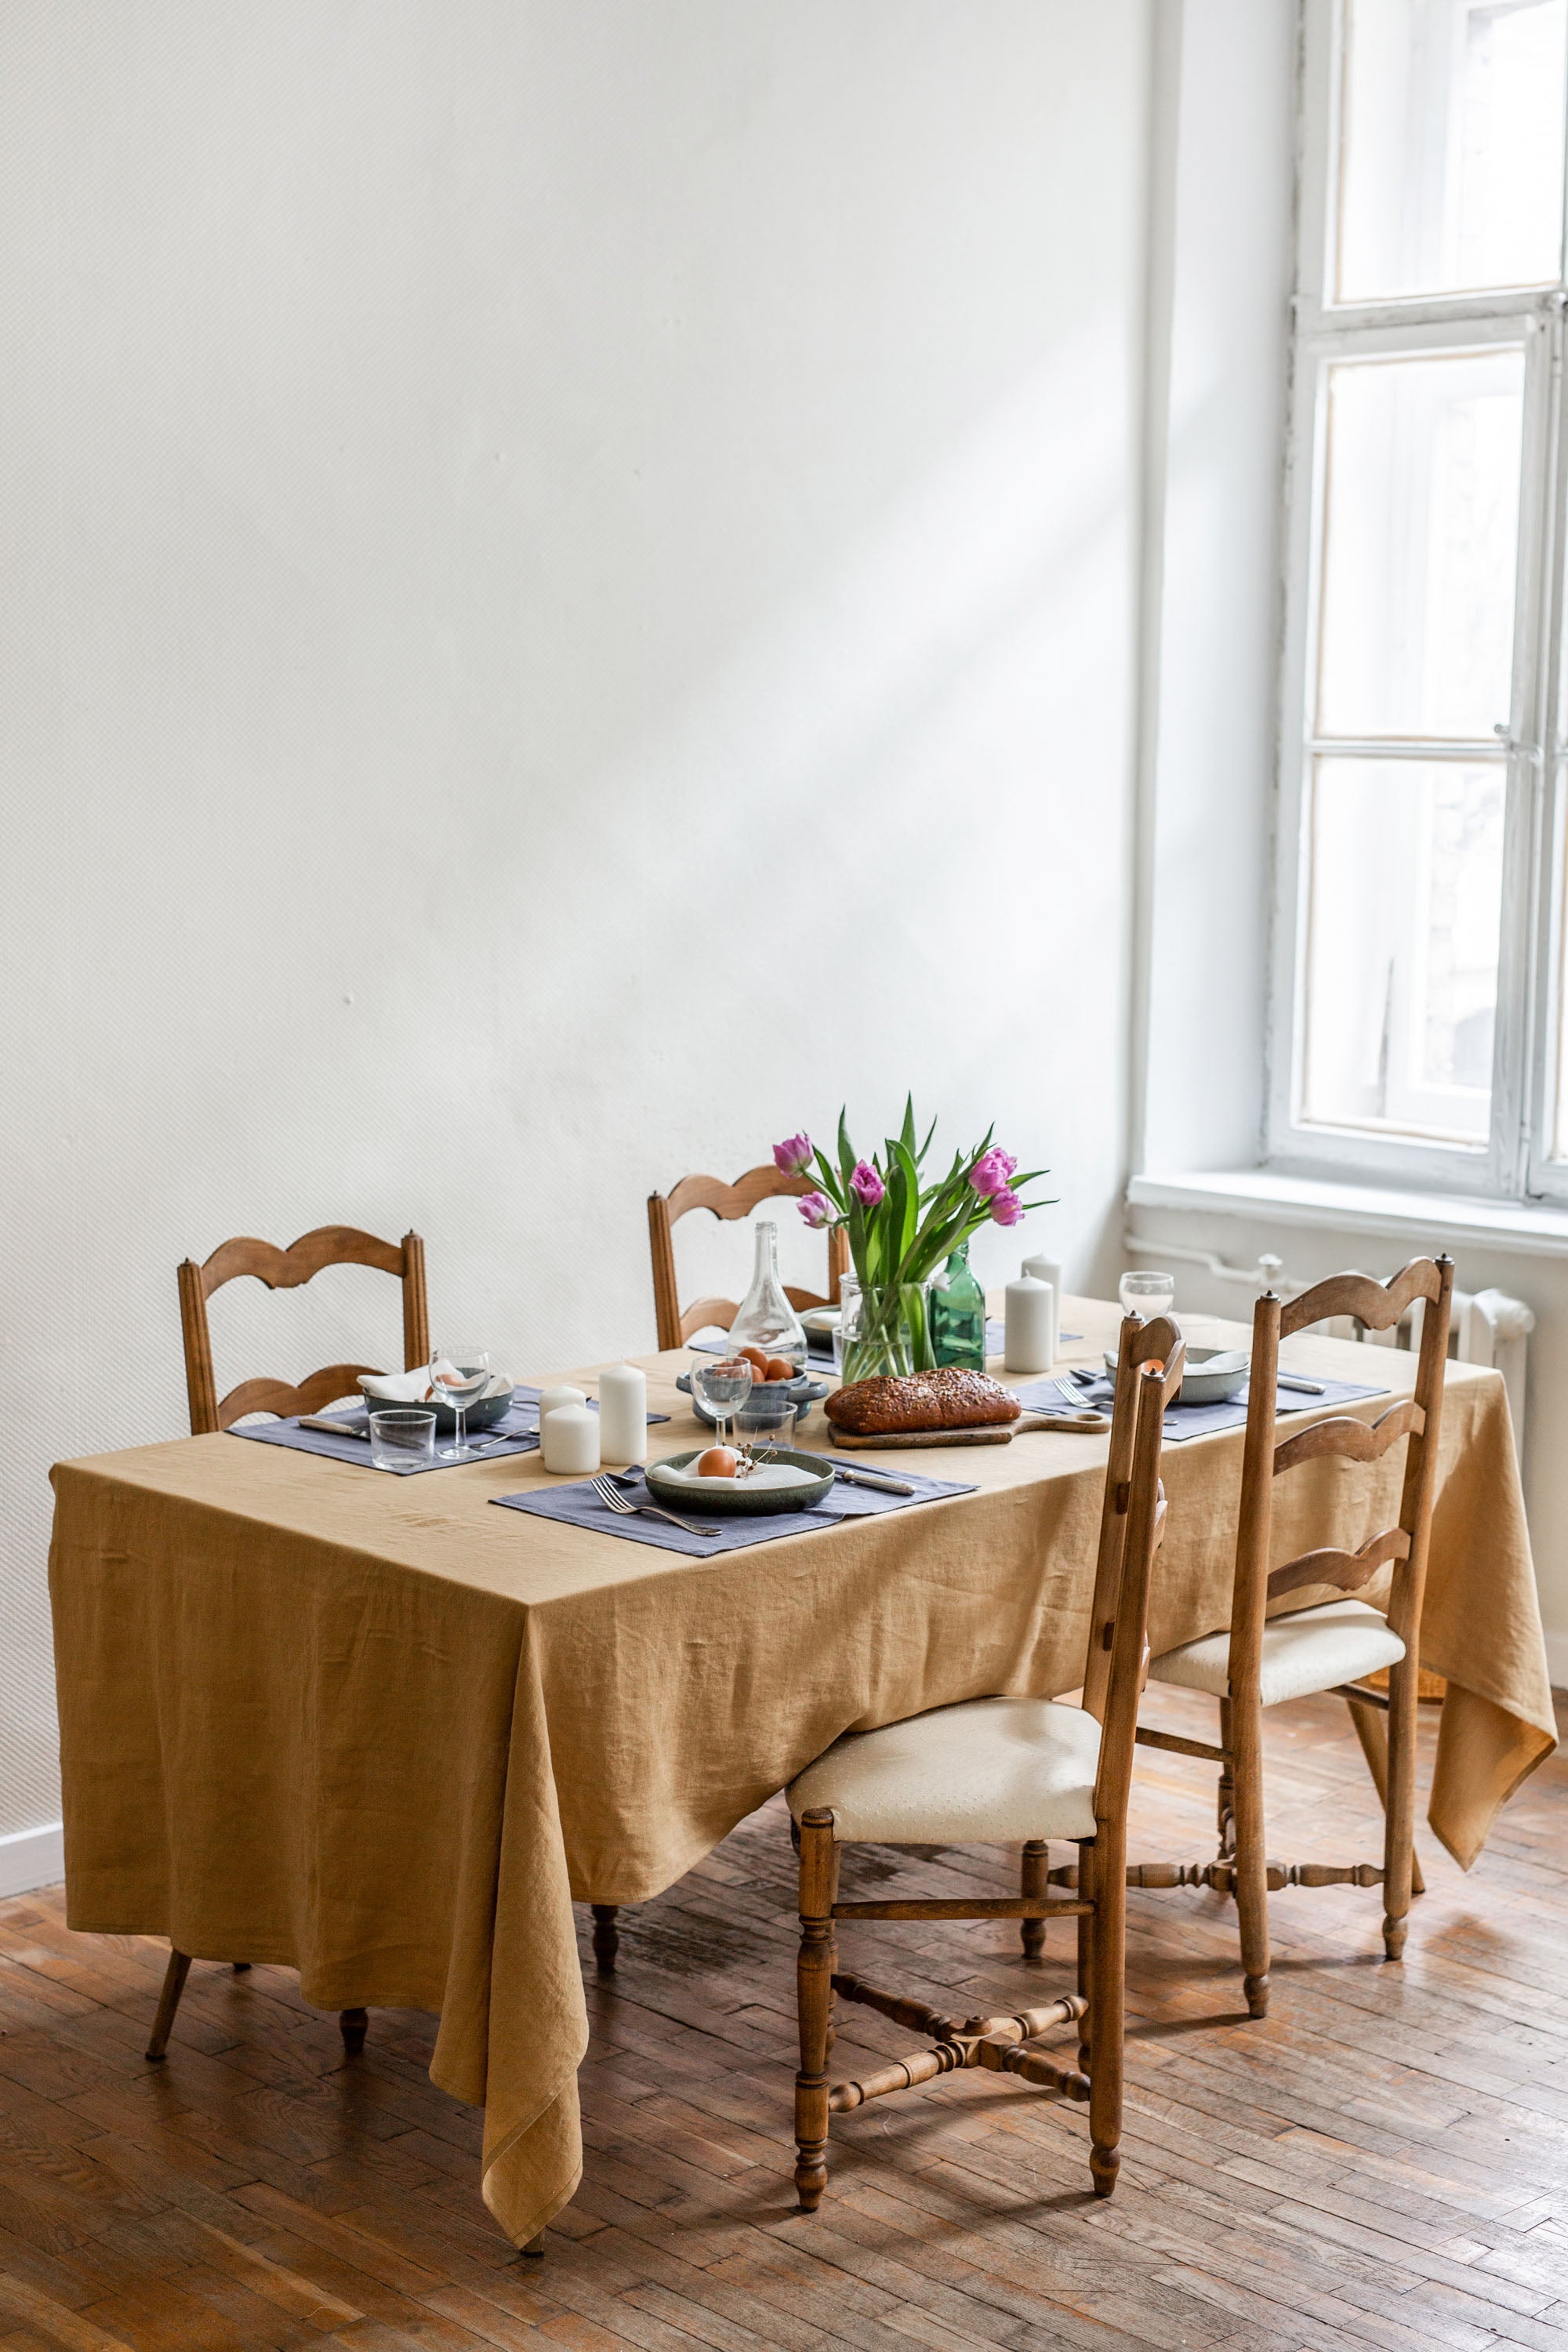 Set Table With Mustard Color Linen Tablecloth By AmourlInen